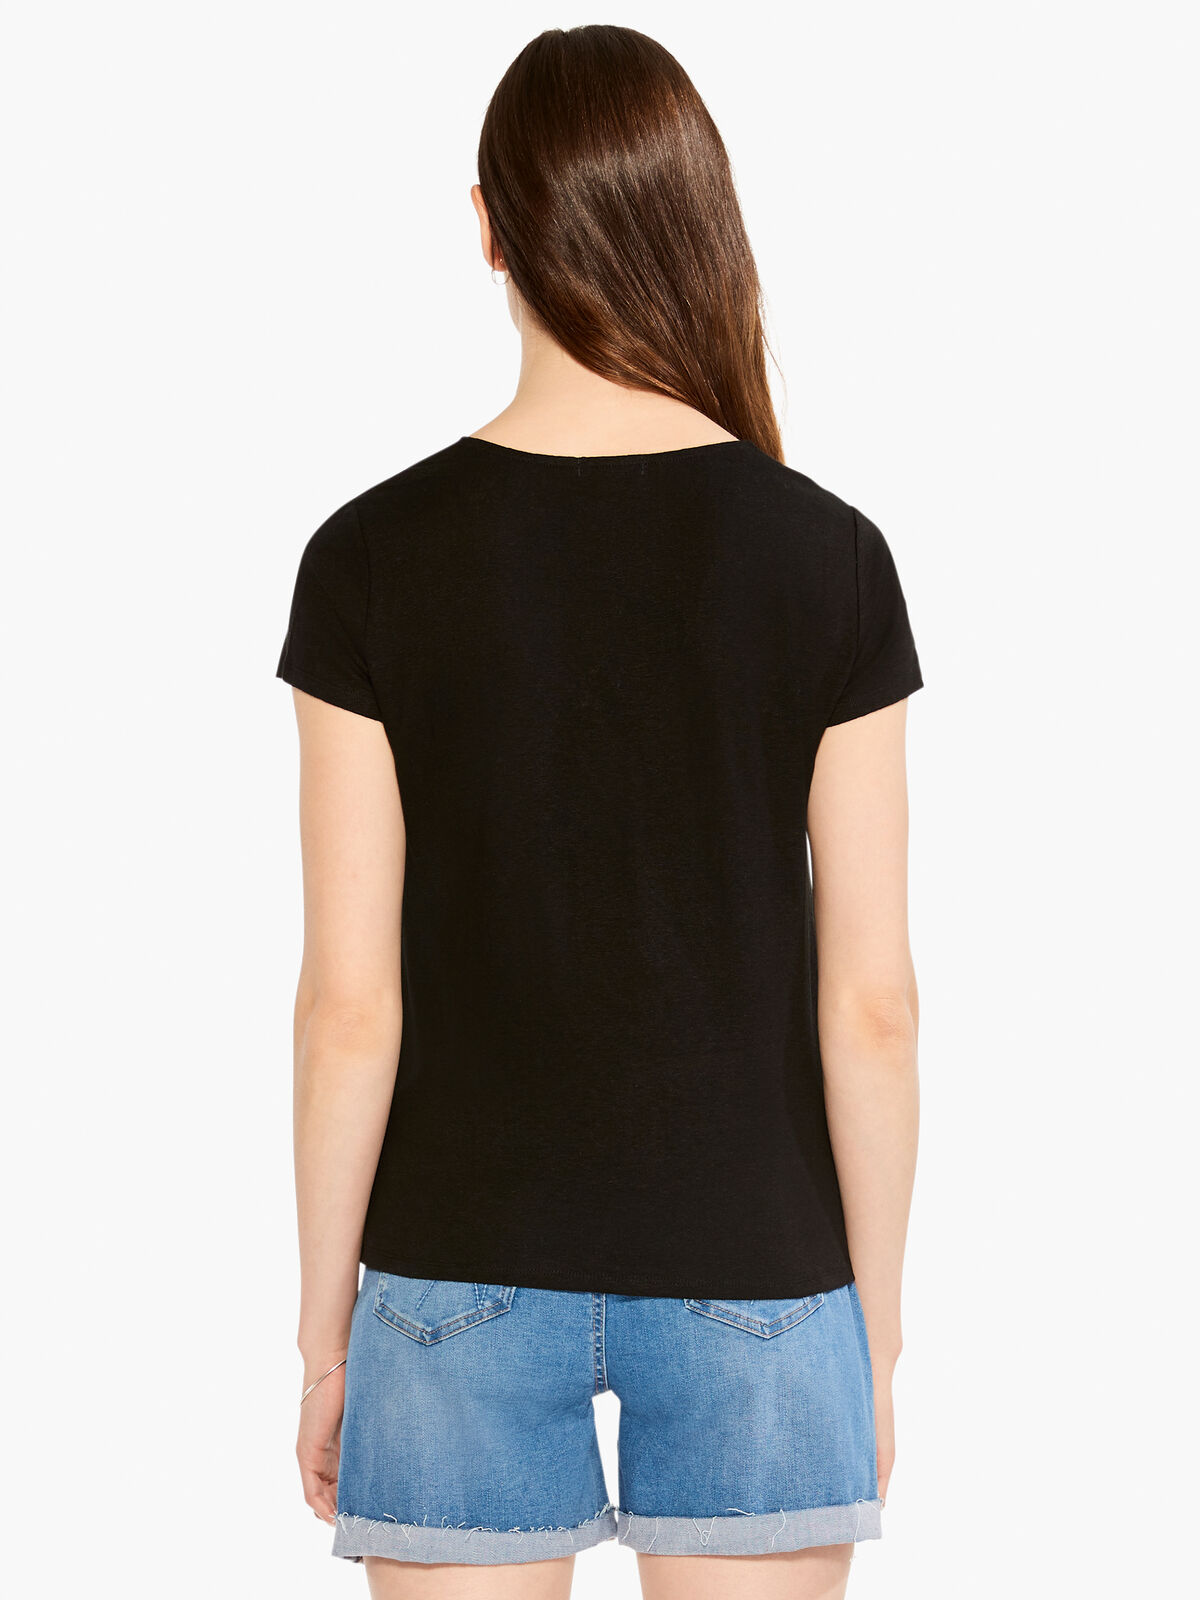 NZT Short Sleeve Knotted V Tee